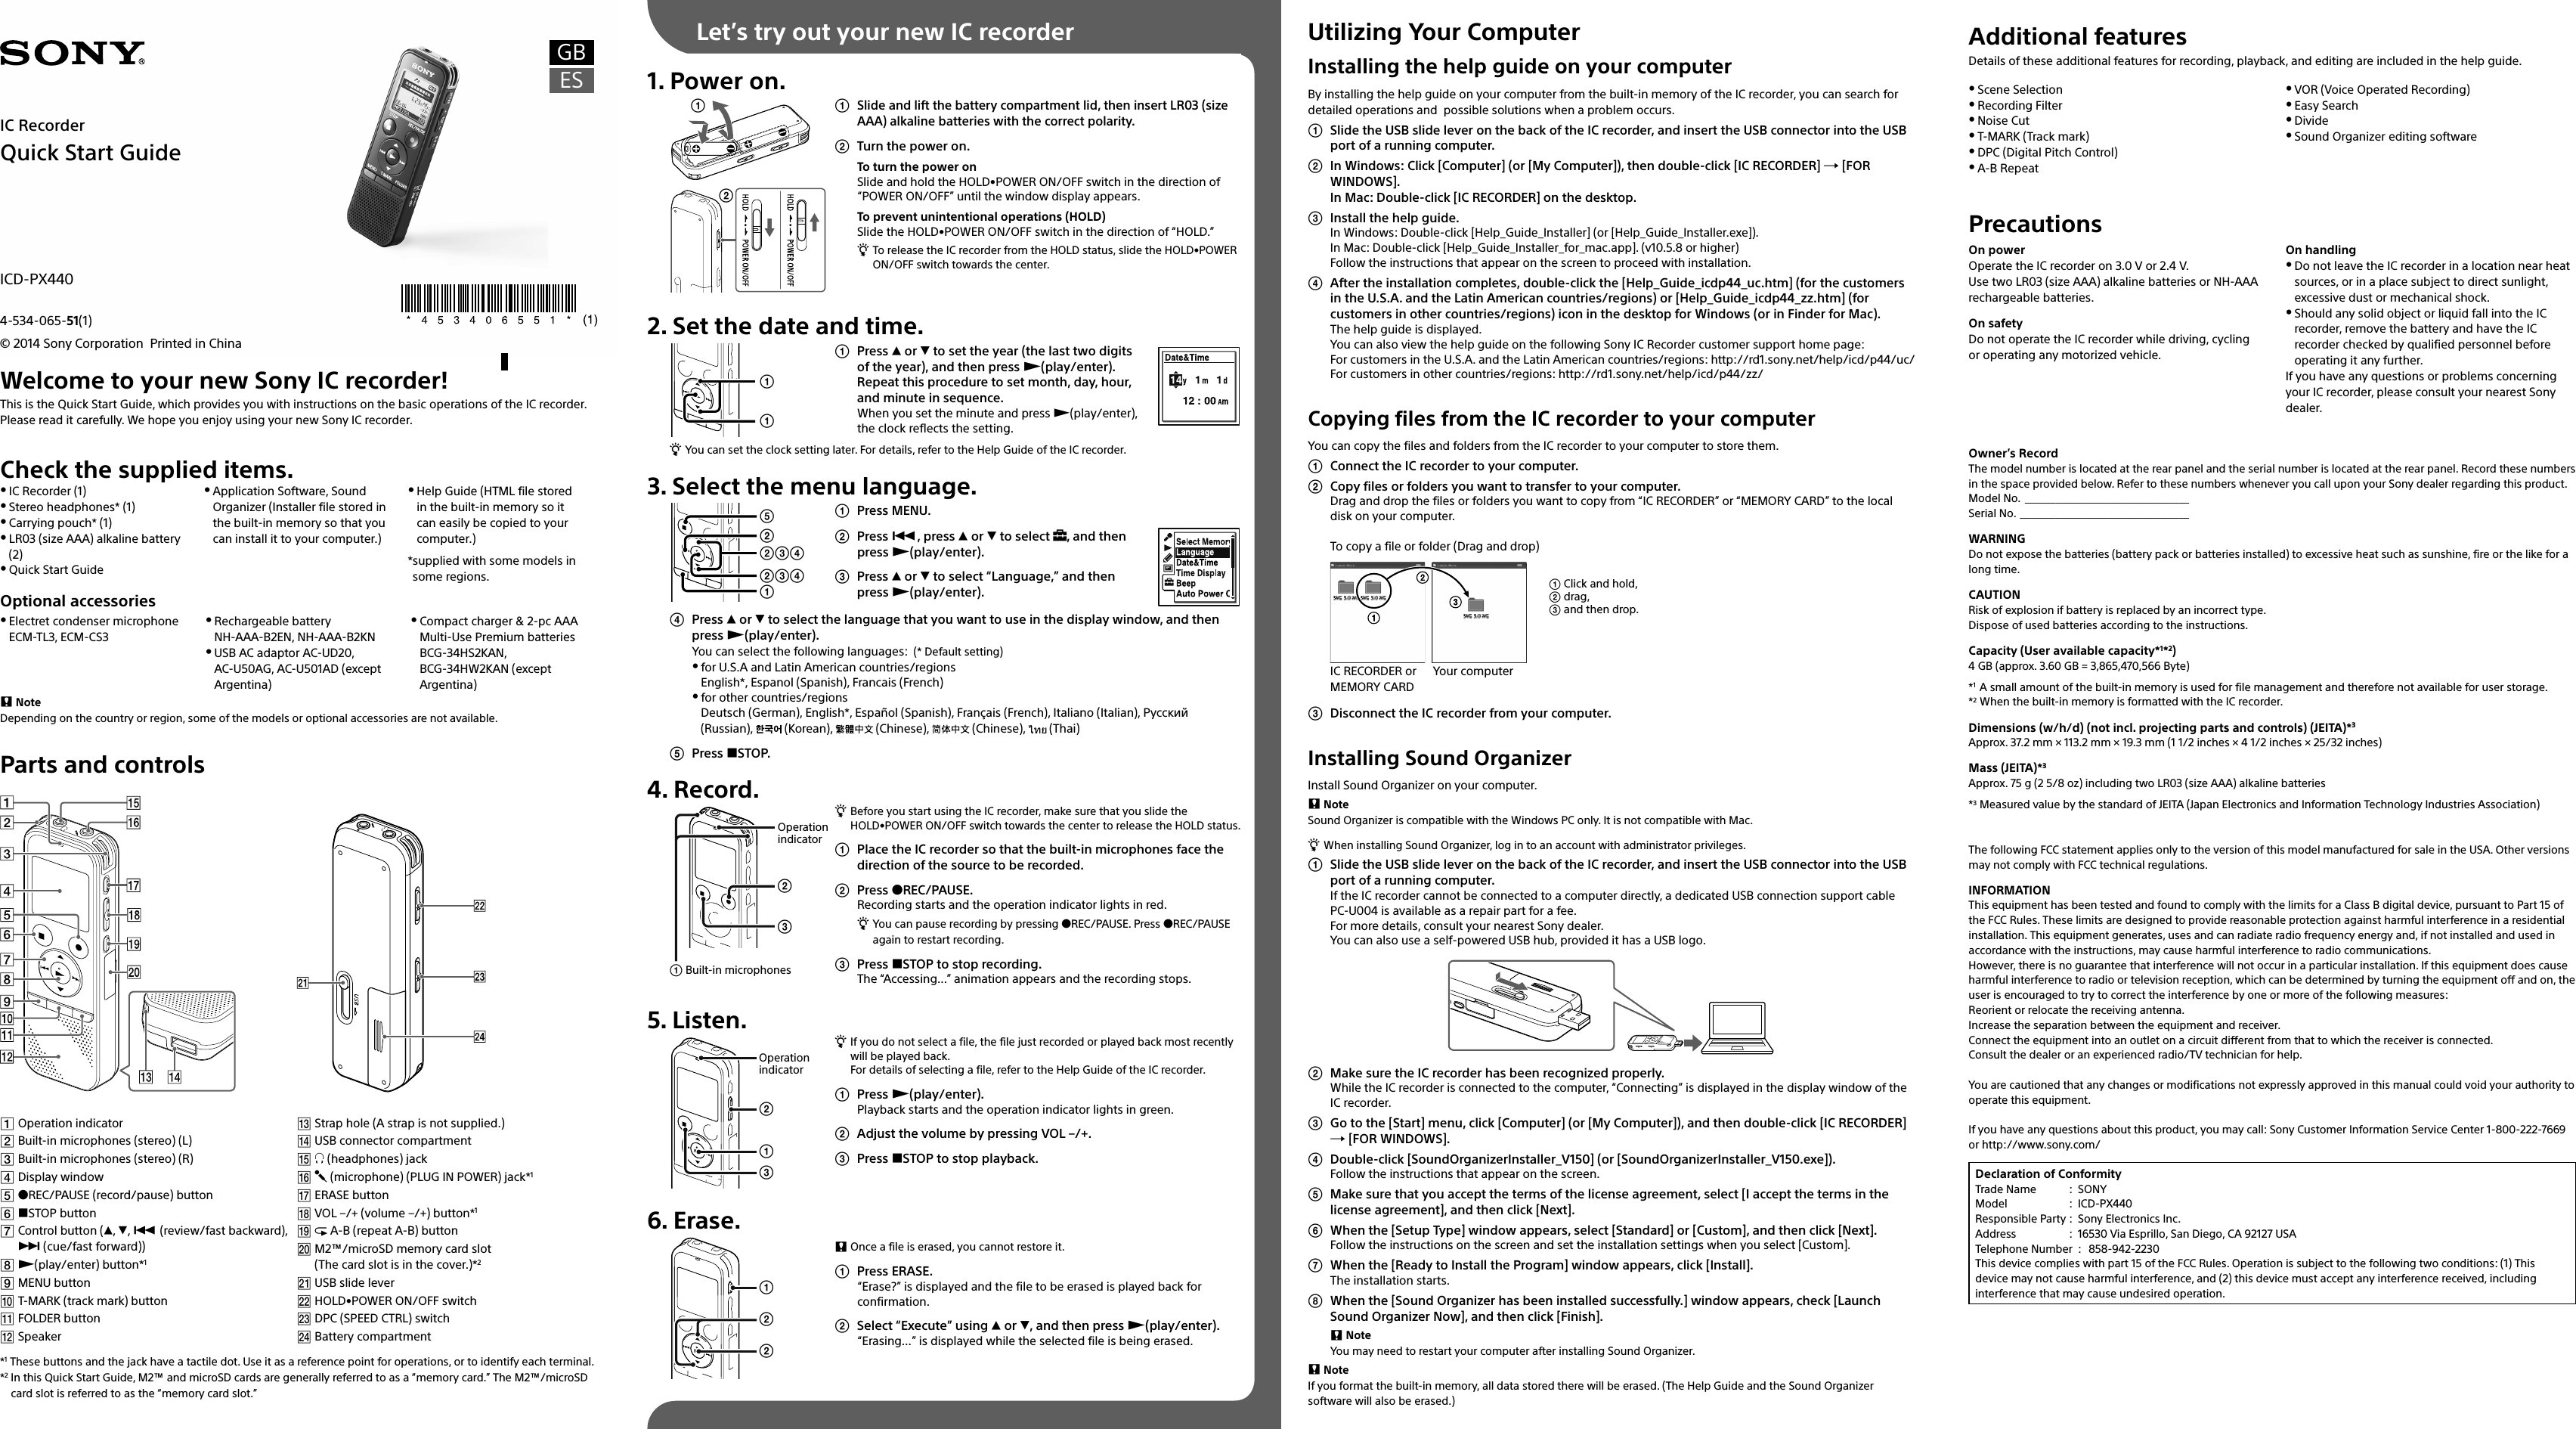 Page 1 of 2 - Sony ICD-PX440 User Manual Quick Start Guide ICDPX440 Qsg